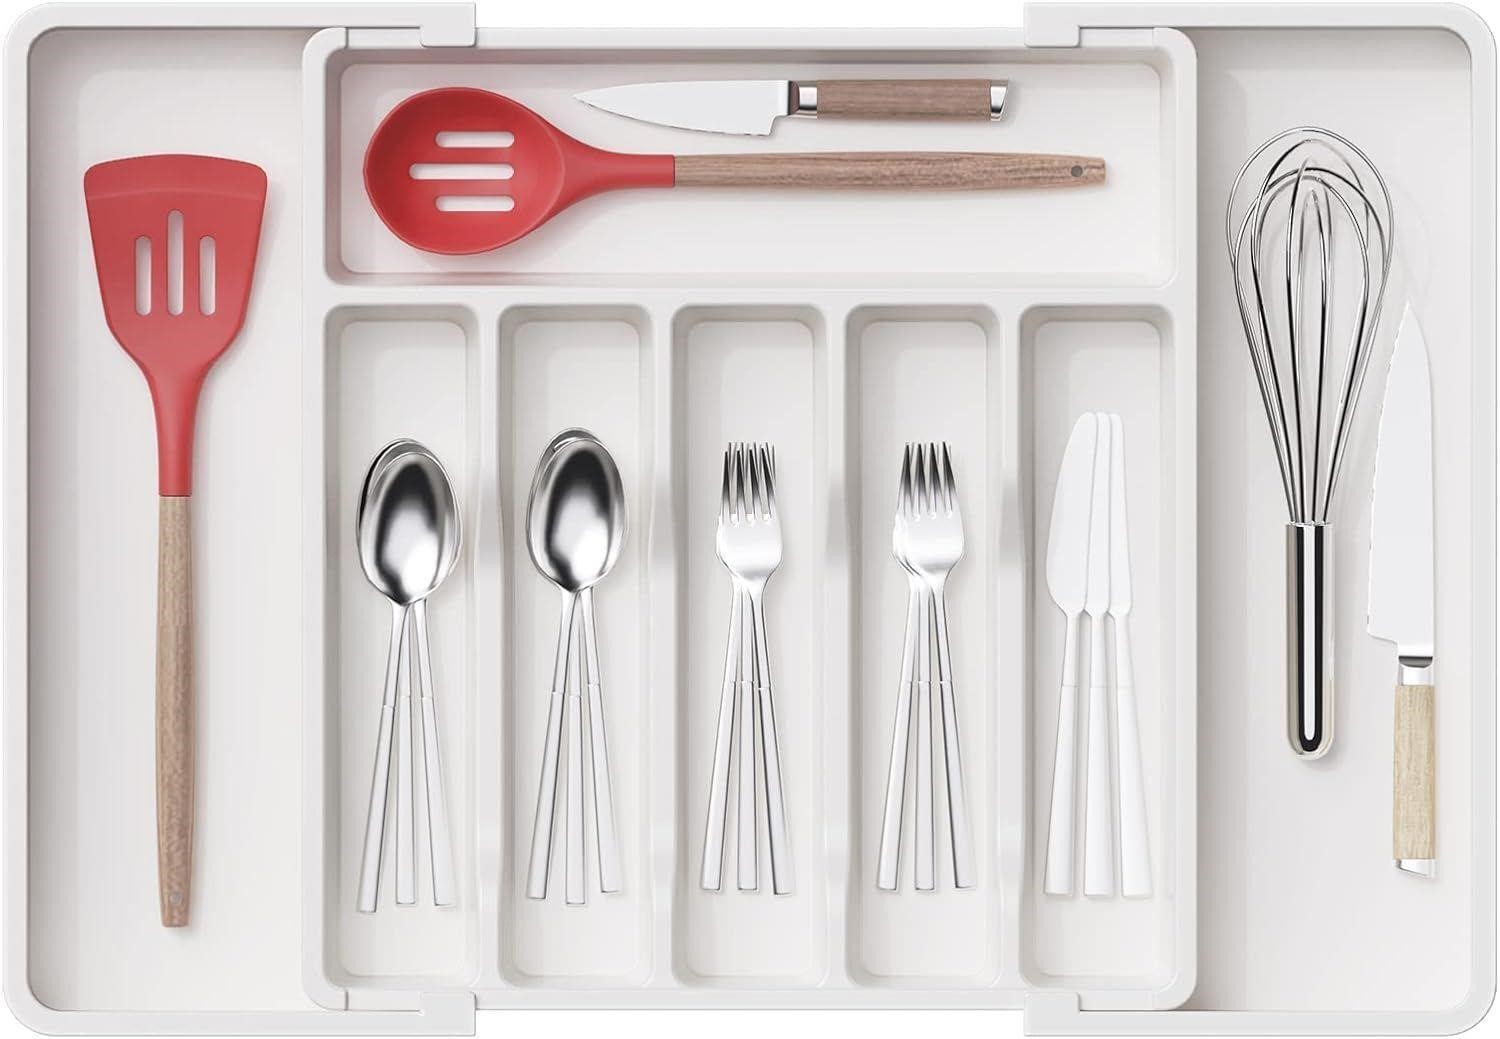 New / Lifewit Cutlery Tray - Expandable